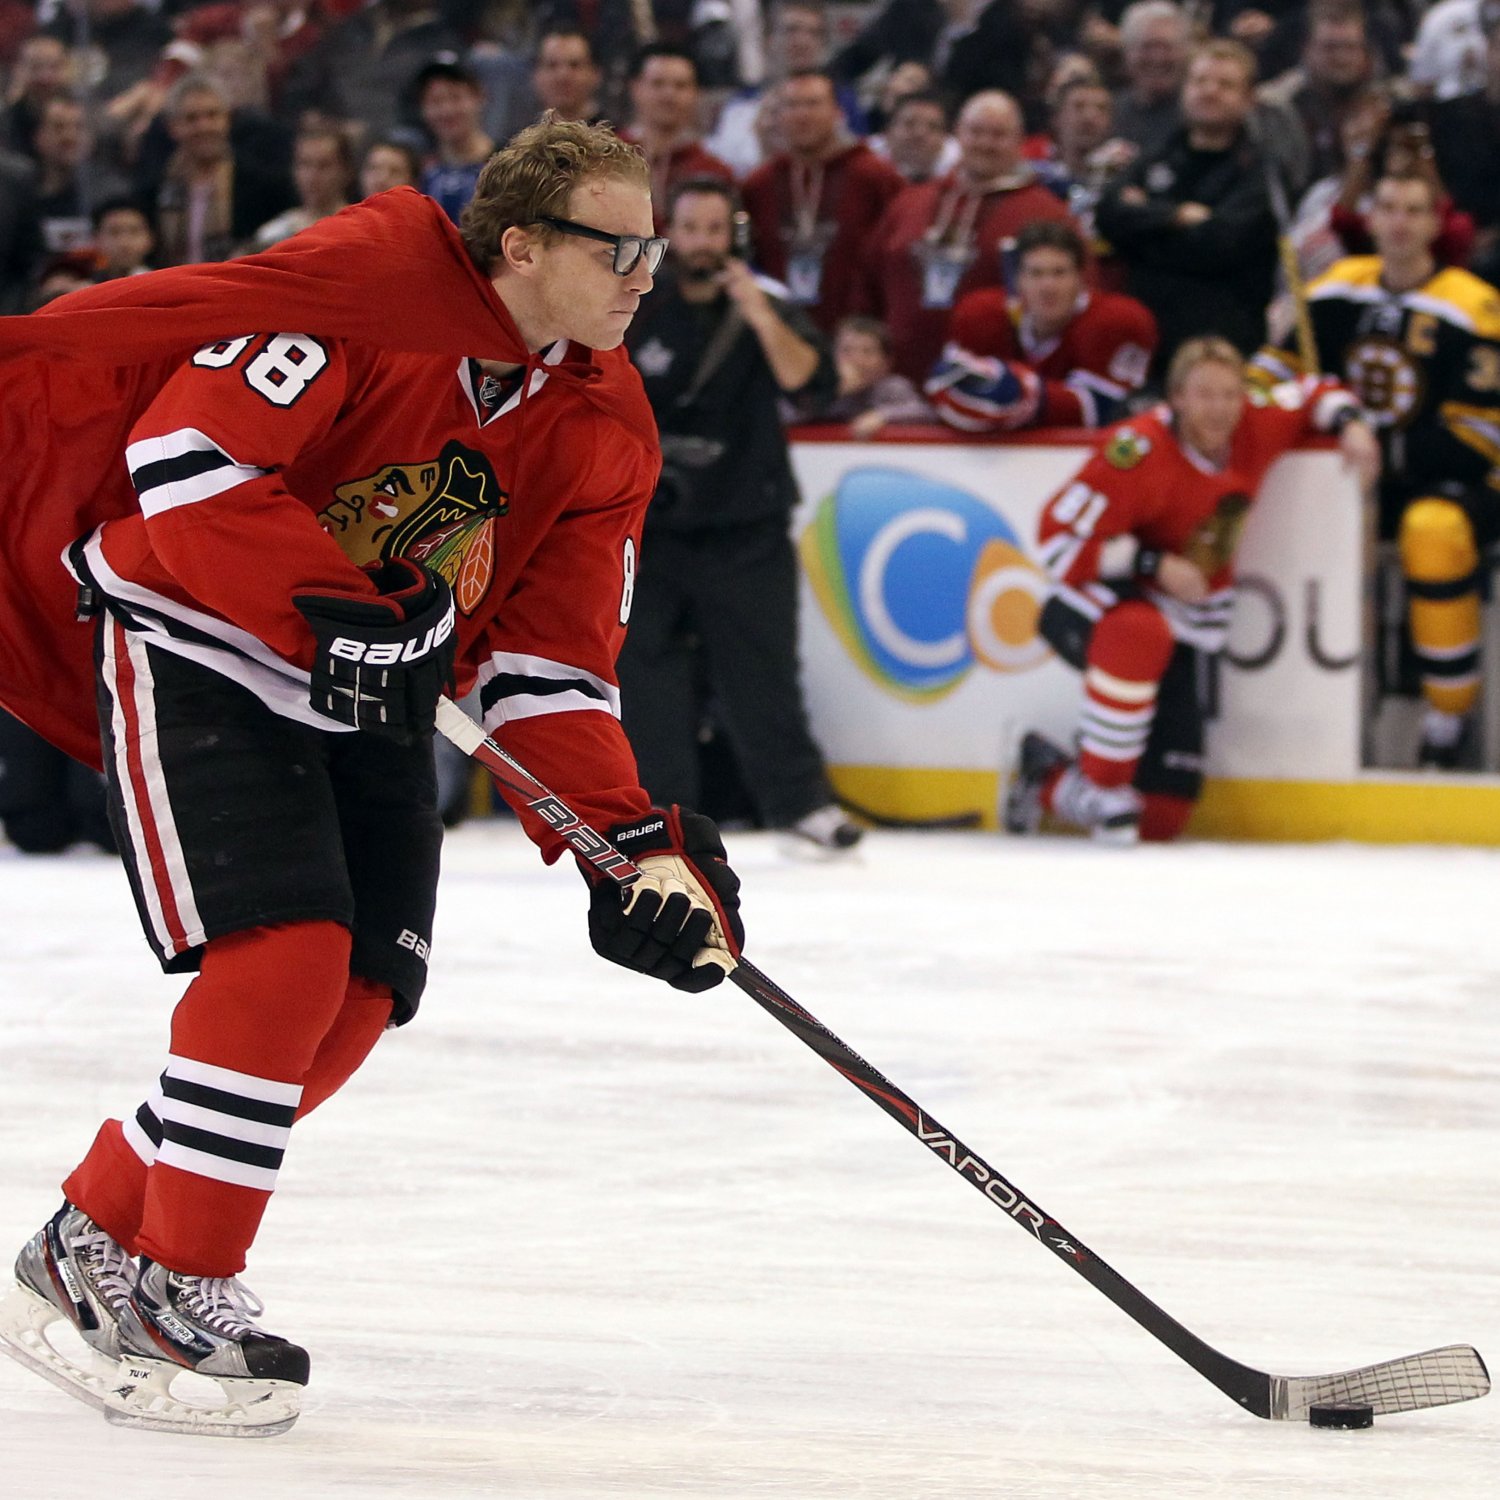 Patrick Kane Rumors: Why Jeremy Roenick's Trade Suggestion Is Insane | Bleacher Report